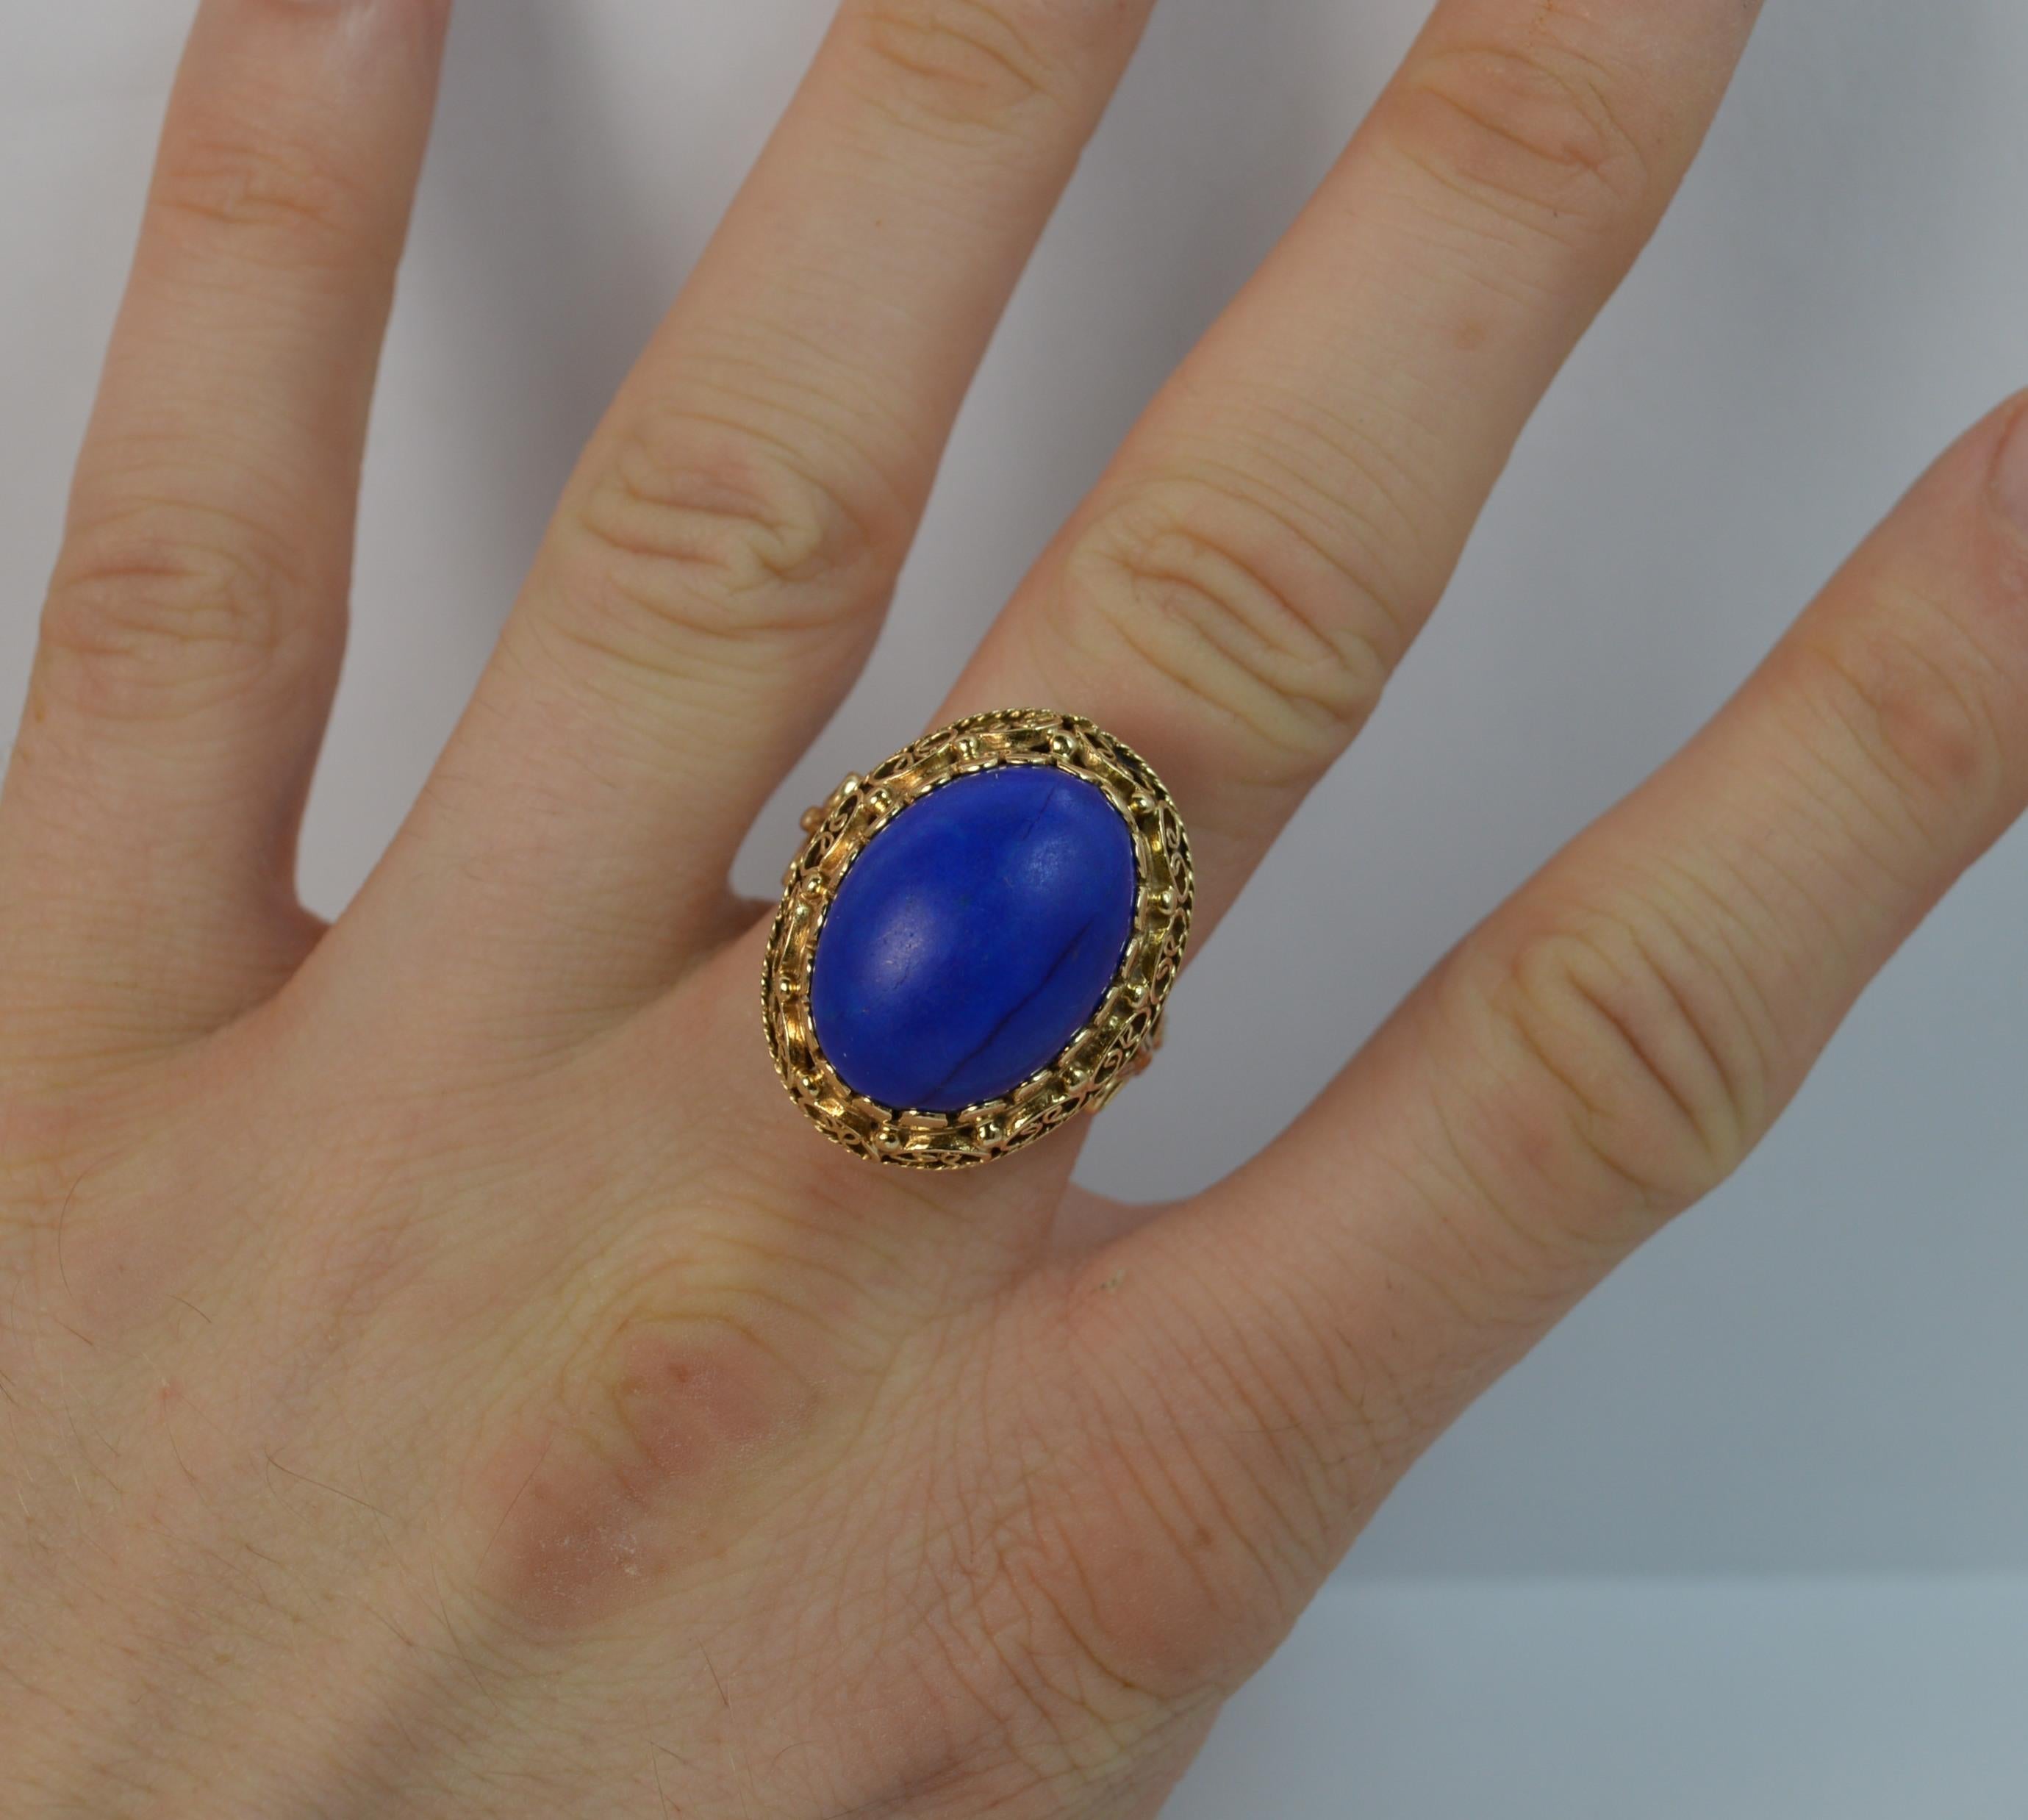 A highly unusual ladies ring. Solid 14 carat yellow gold example. 
SIZE ; O 1/2 UK, 7 1/2 US
A large lapis lazuli stone of oval shape, 14mm x 18mm. Protruding 15mm off the finger.

The stone is in a pierced head setting with braided design to the